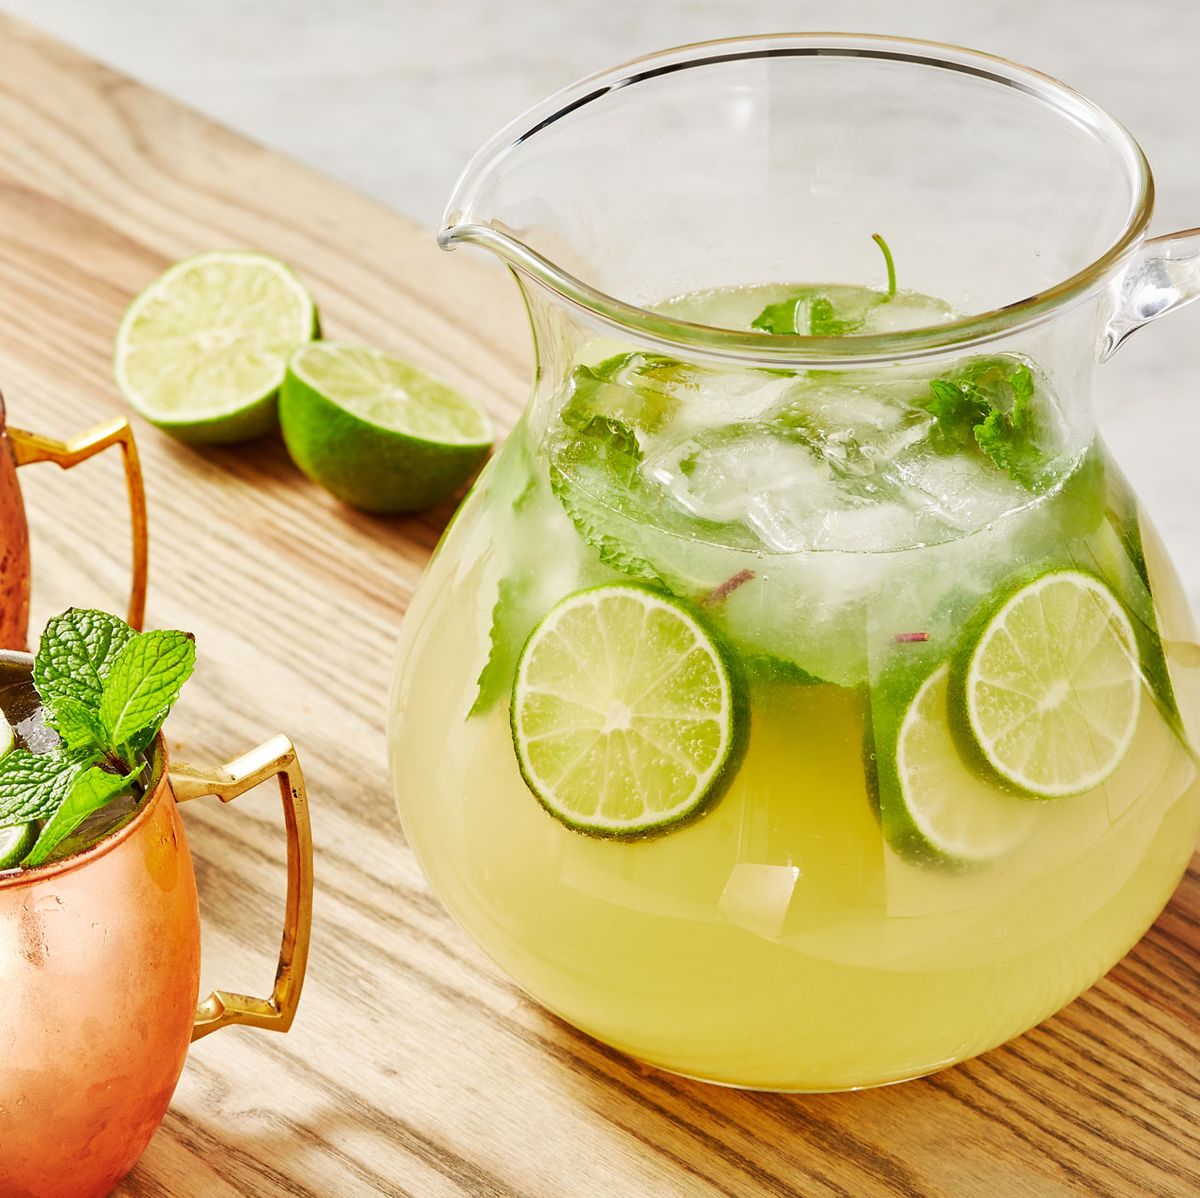 https://hips.hearstapps.com/hmg-prod/images/delish-191018-moscow-mule-punch-0144-landscape-pf-1573163319.jpg?crop=0.668xw:1.00xh;0.170xw,0&resize=1200:*